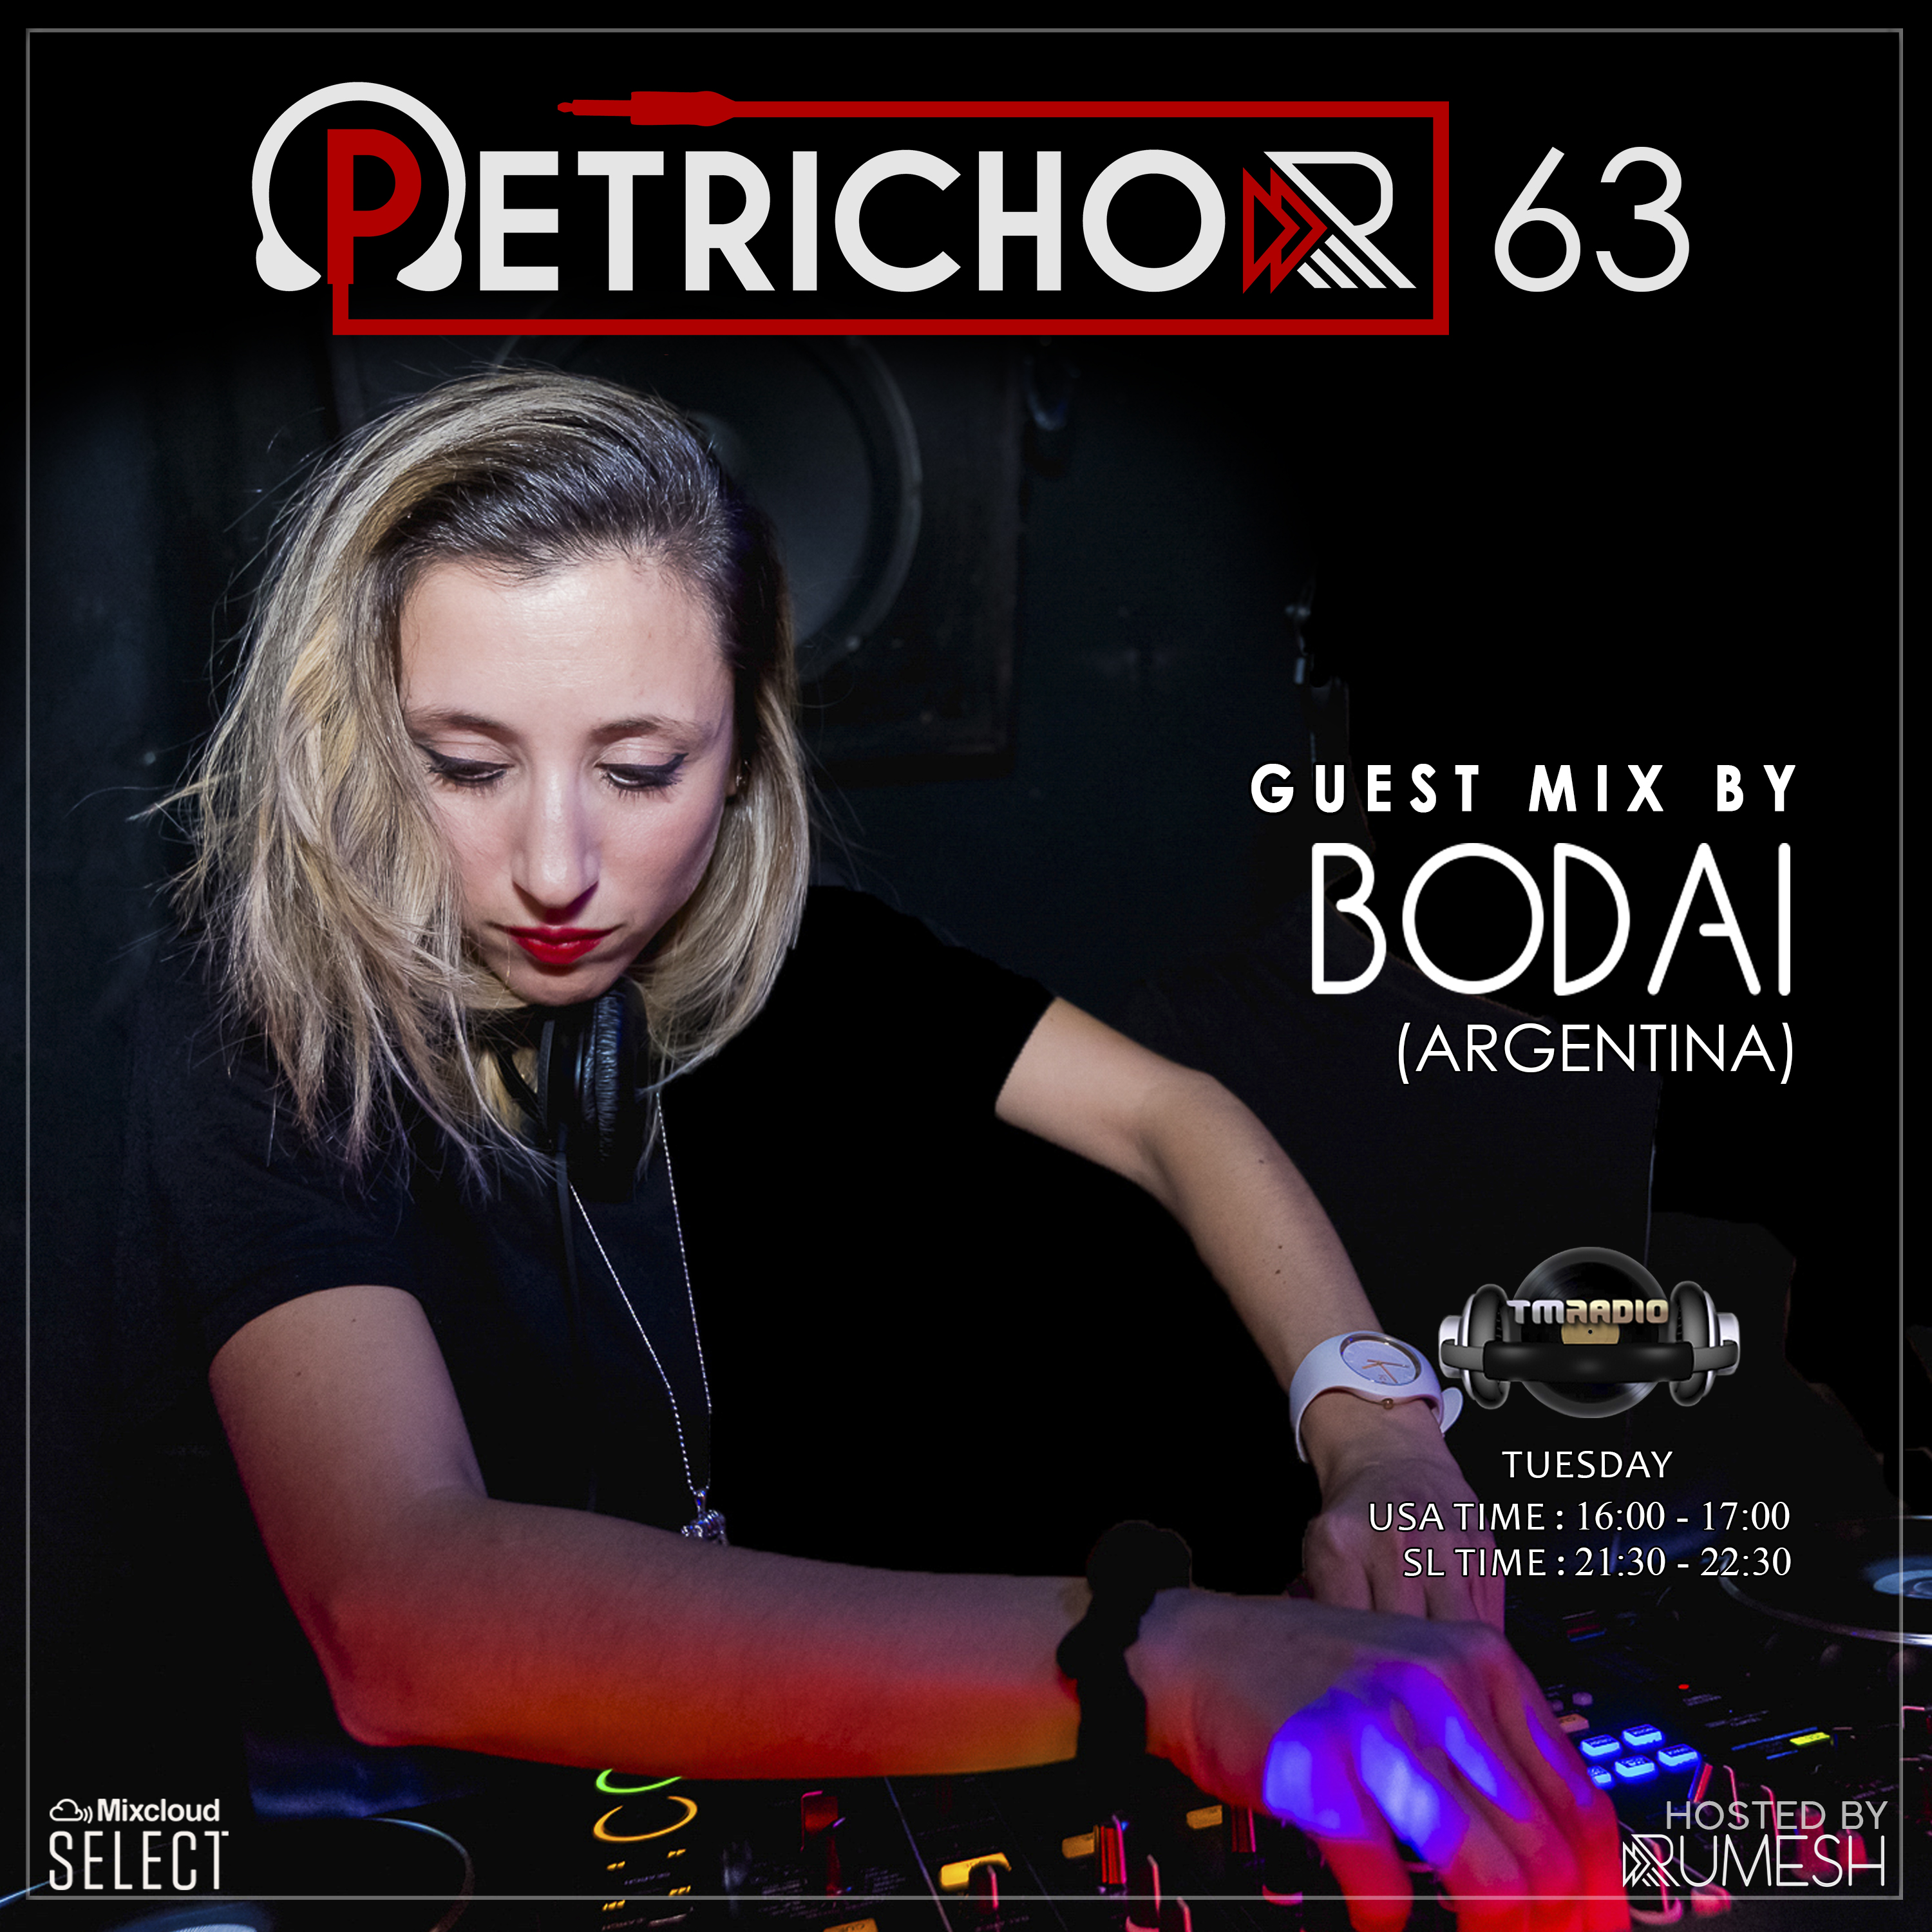 Petrichor :: Petrichor 63 guest mix by Bodai (Argentina) (aired on January 21st, 2020) banner logo